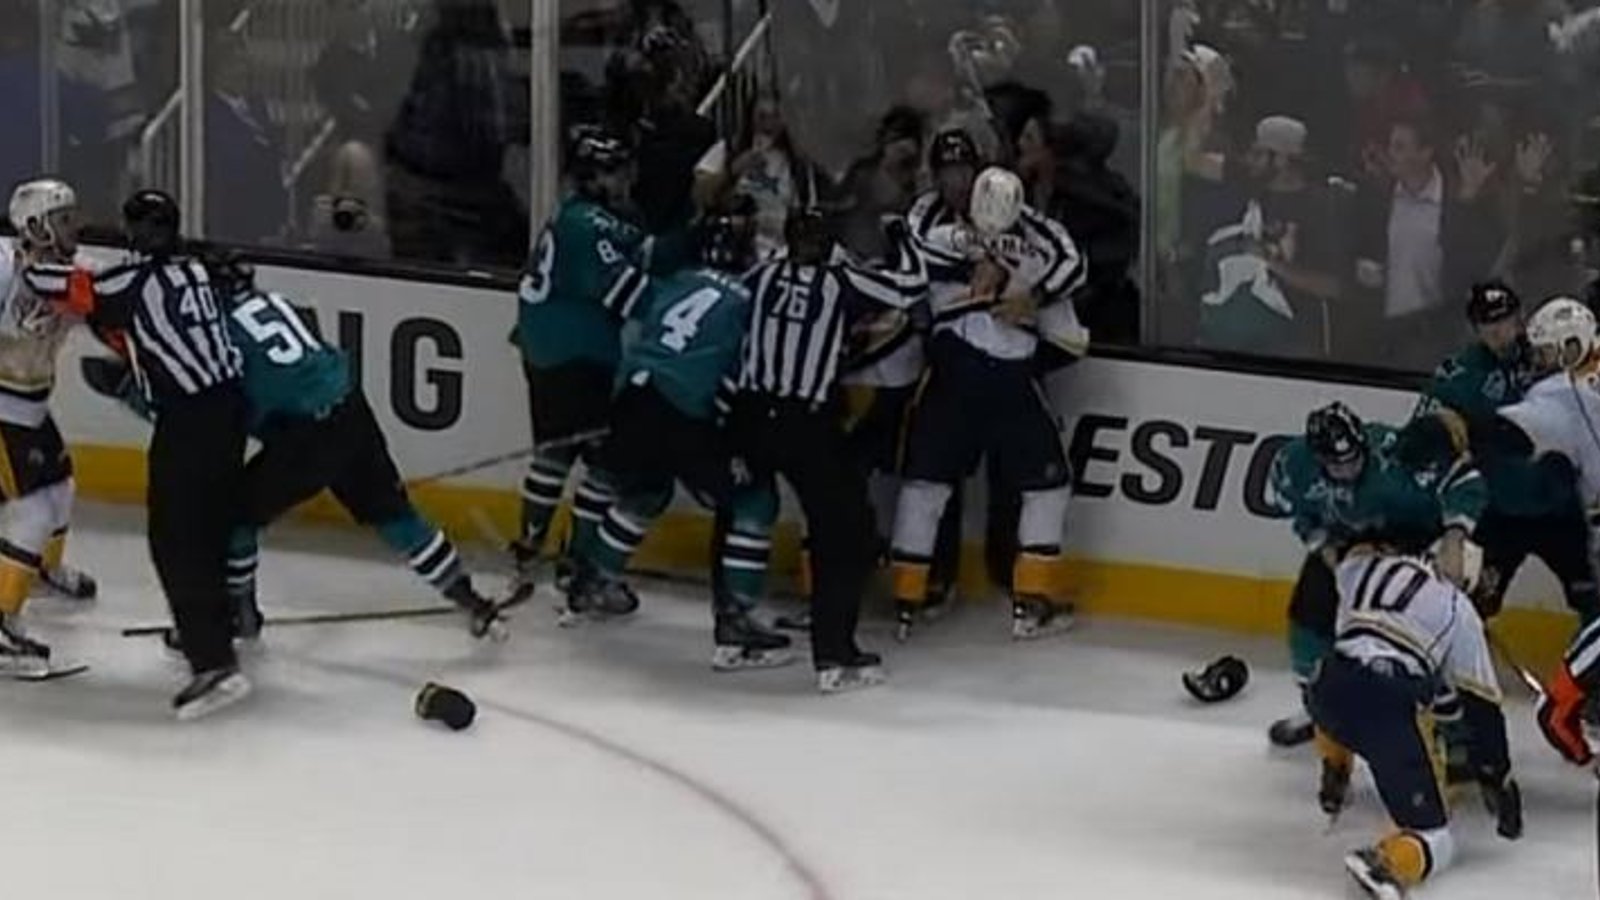 Sharks and Predators end Game 1 with a brawl.